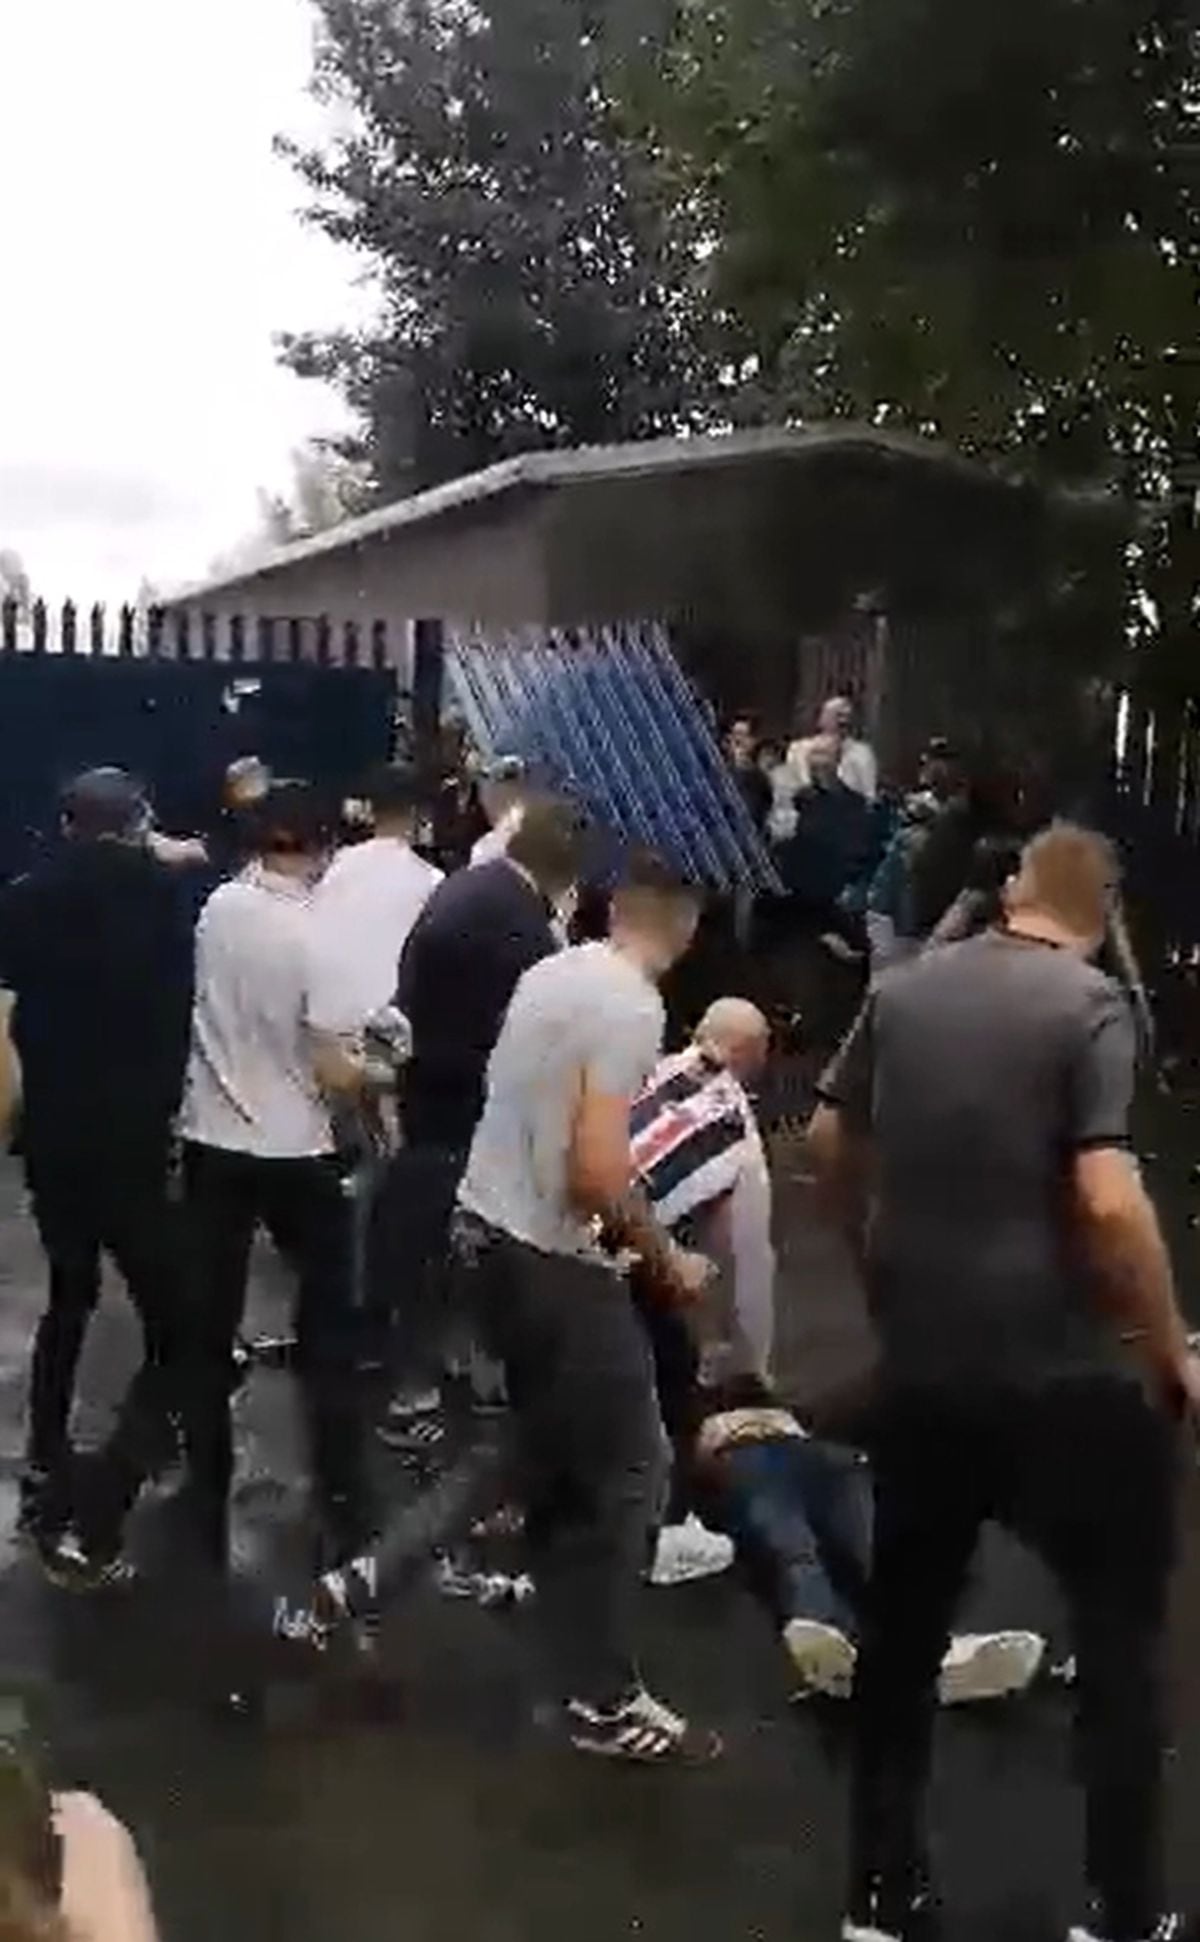 Violence outside The Hawthorns was caught on camera and shared on social media. Photo: Twitter